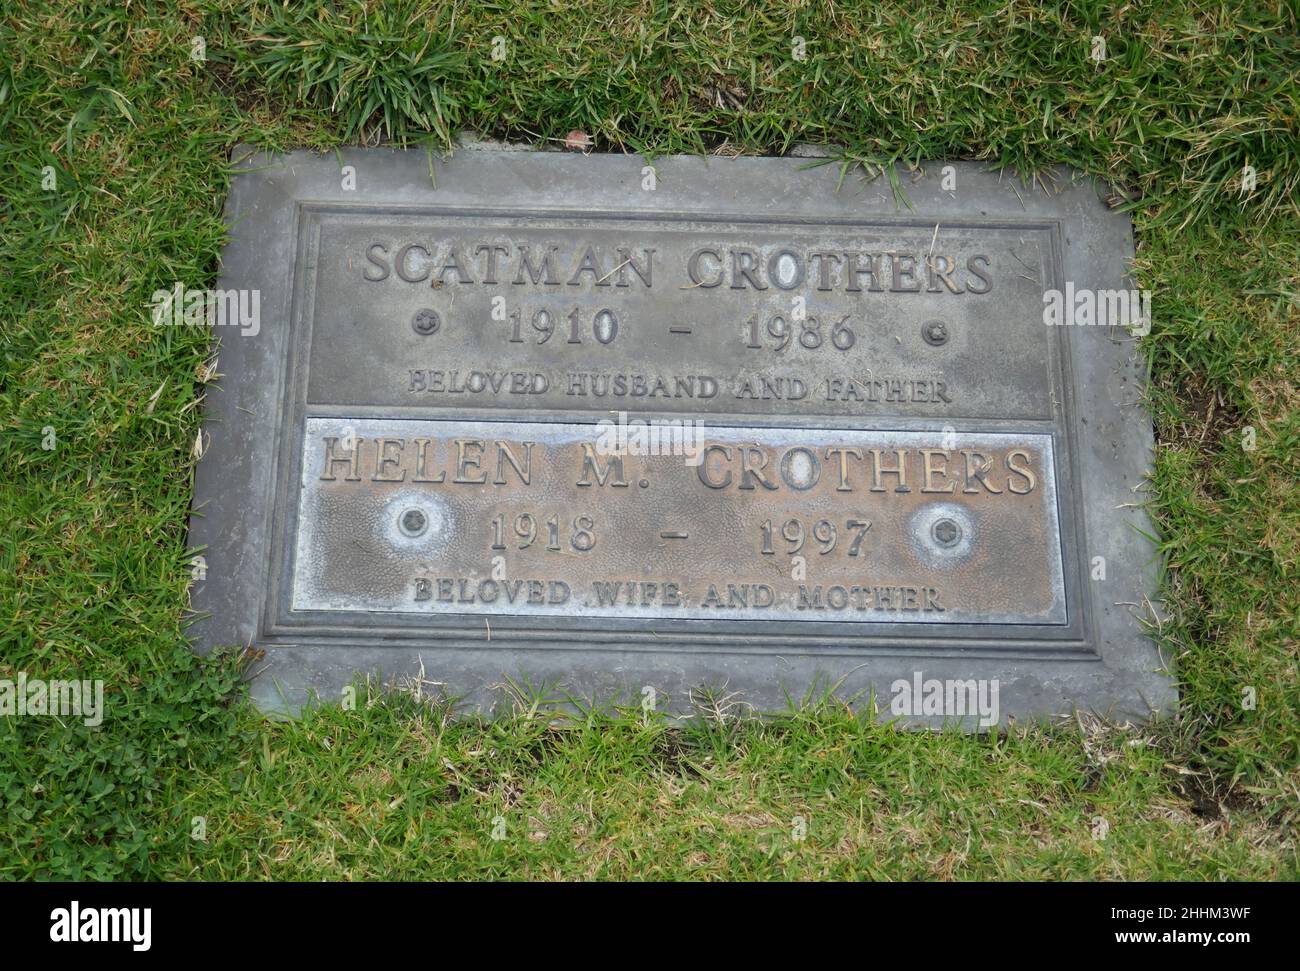 Los Angeles, California, USA 19th January 2022 Actor Scatman Crothers Grave in Lincoln Terrace at Forest Lawn Memorial Park Hollywood Hills on January 19, 2022 in Los Angeles, California, USA. Photo by Barry King/Alamy Stock Photo Stock Photo